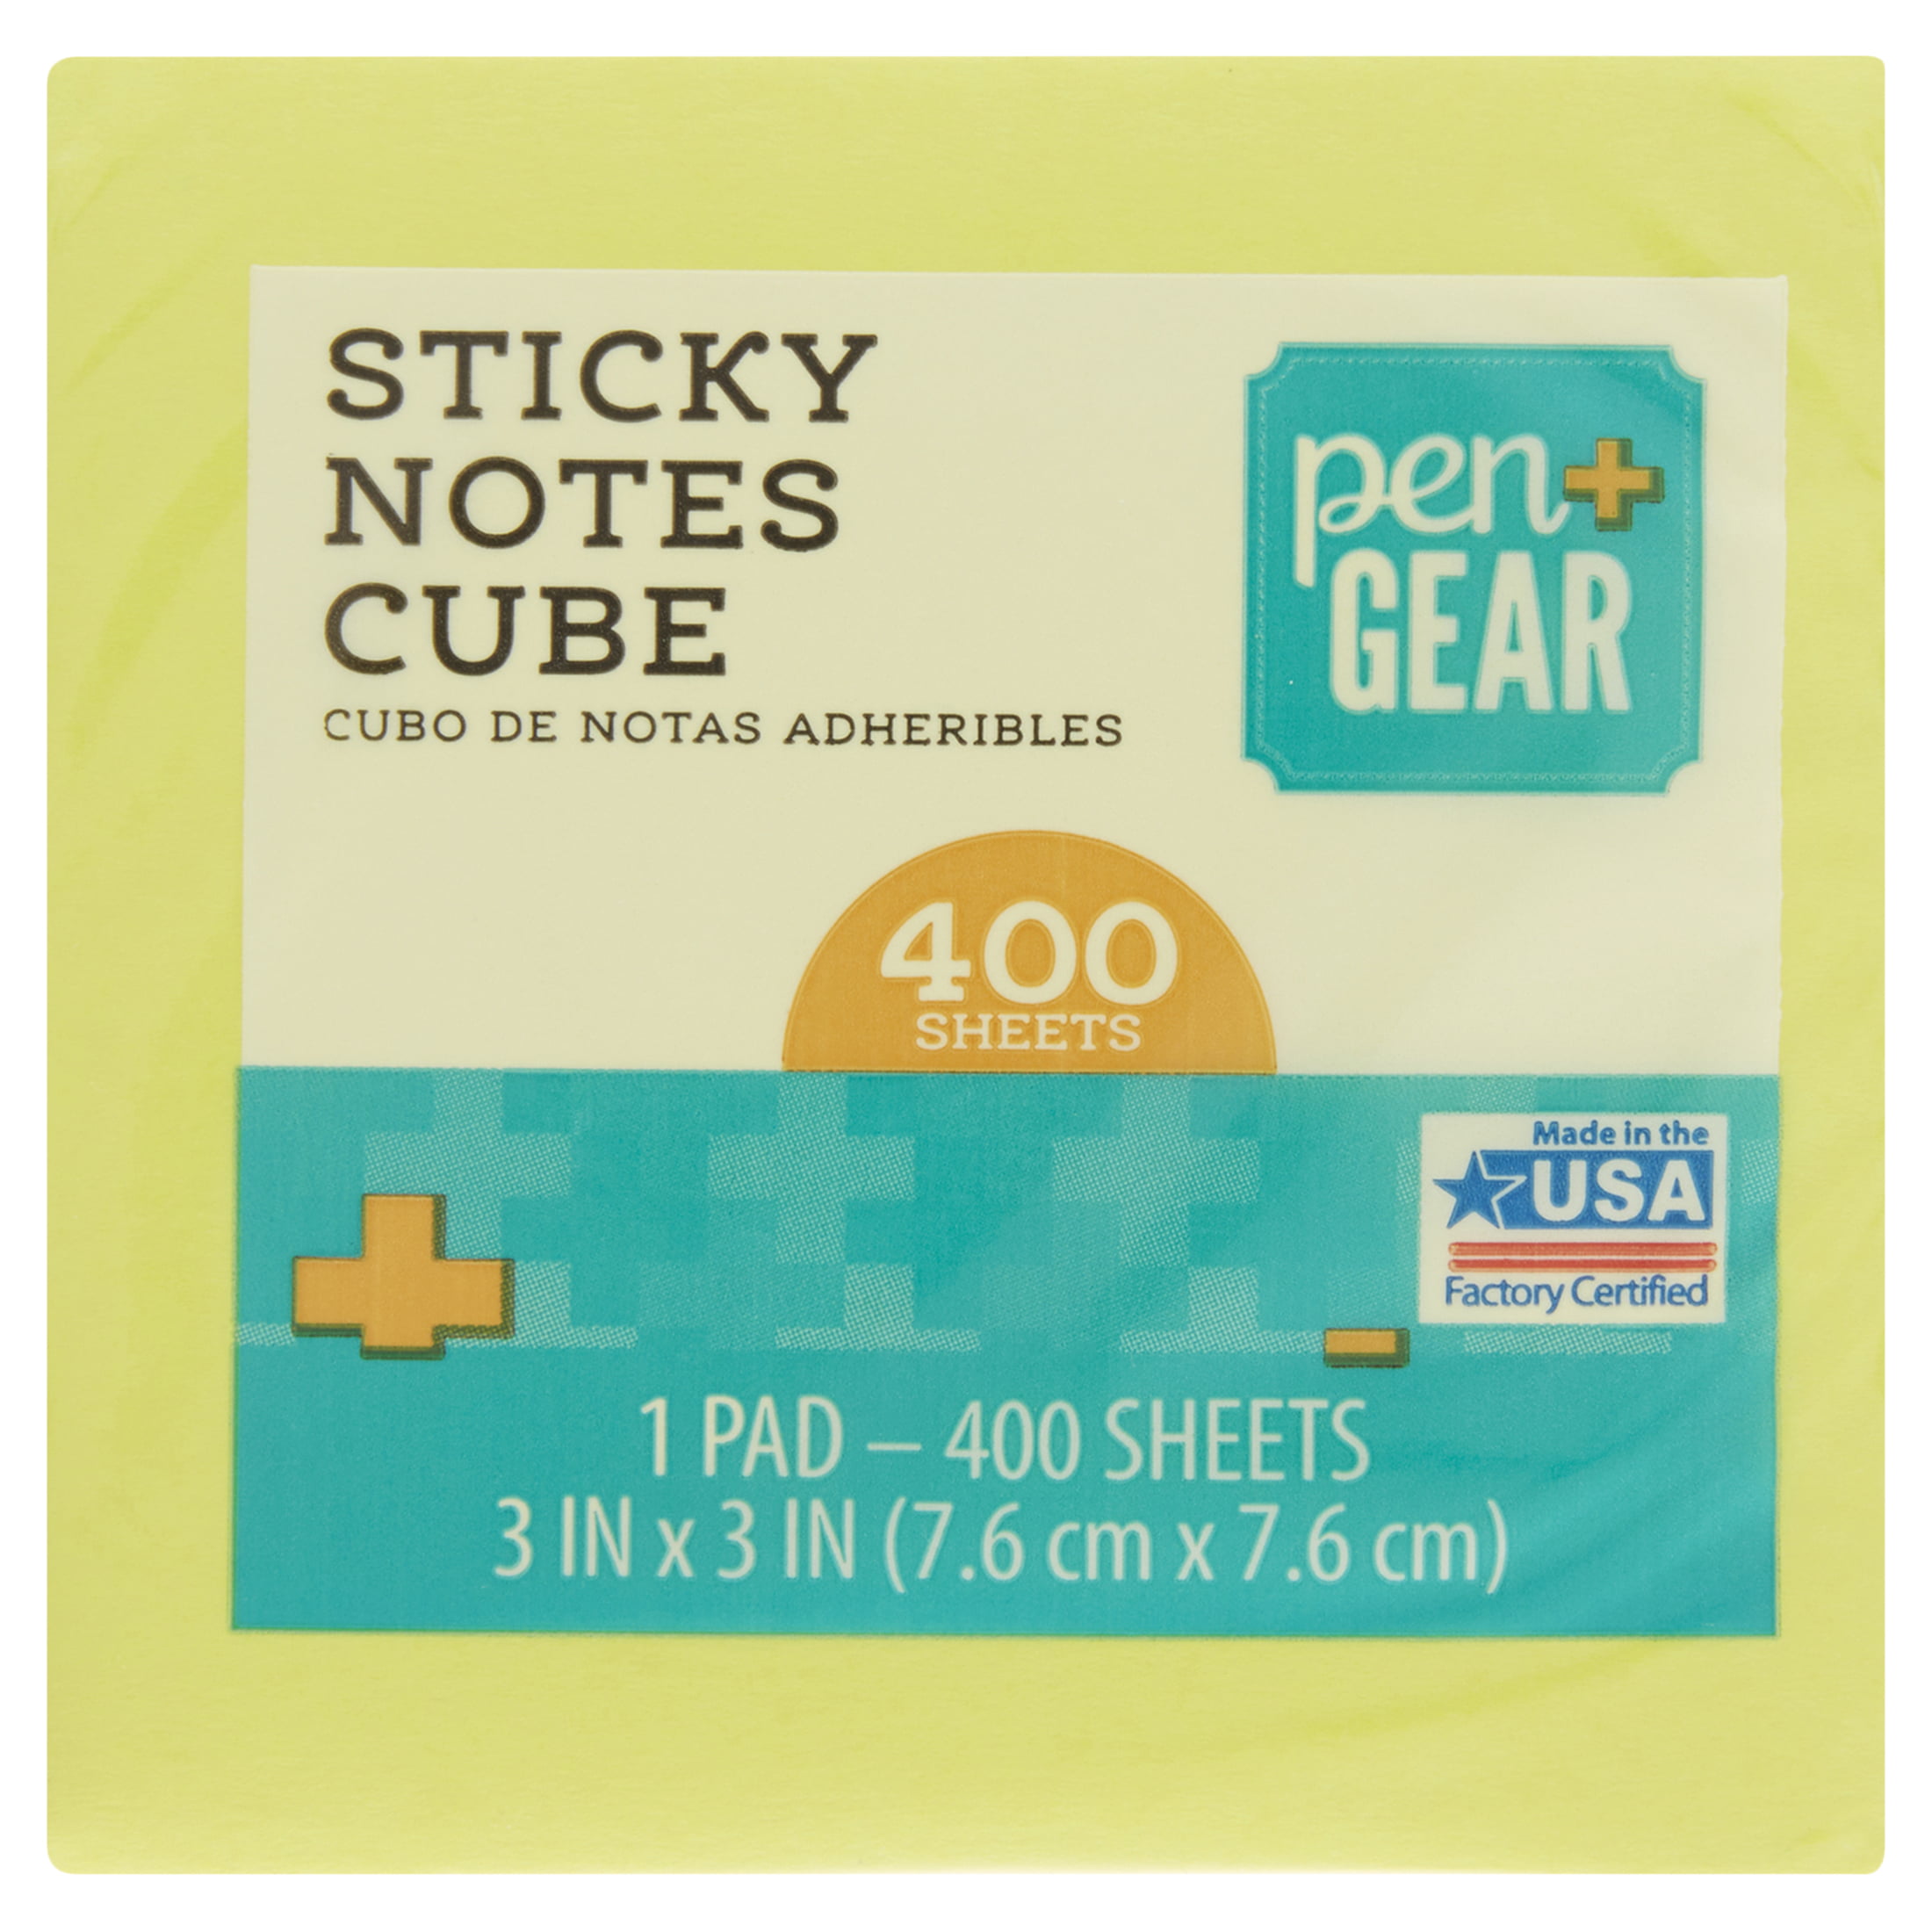 Pen + Gear Sticky Notes, 3" x 3", Assorted Colors, 400 Sheets, 1 Cube